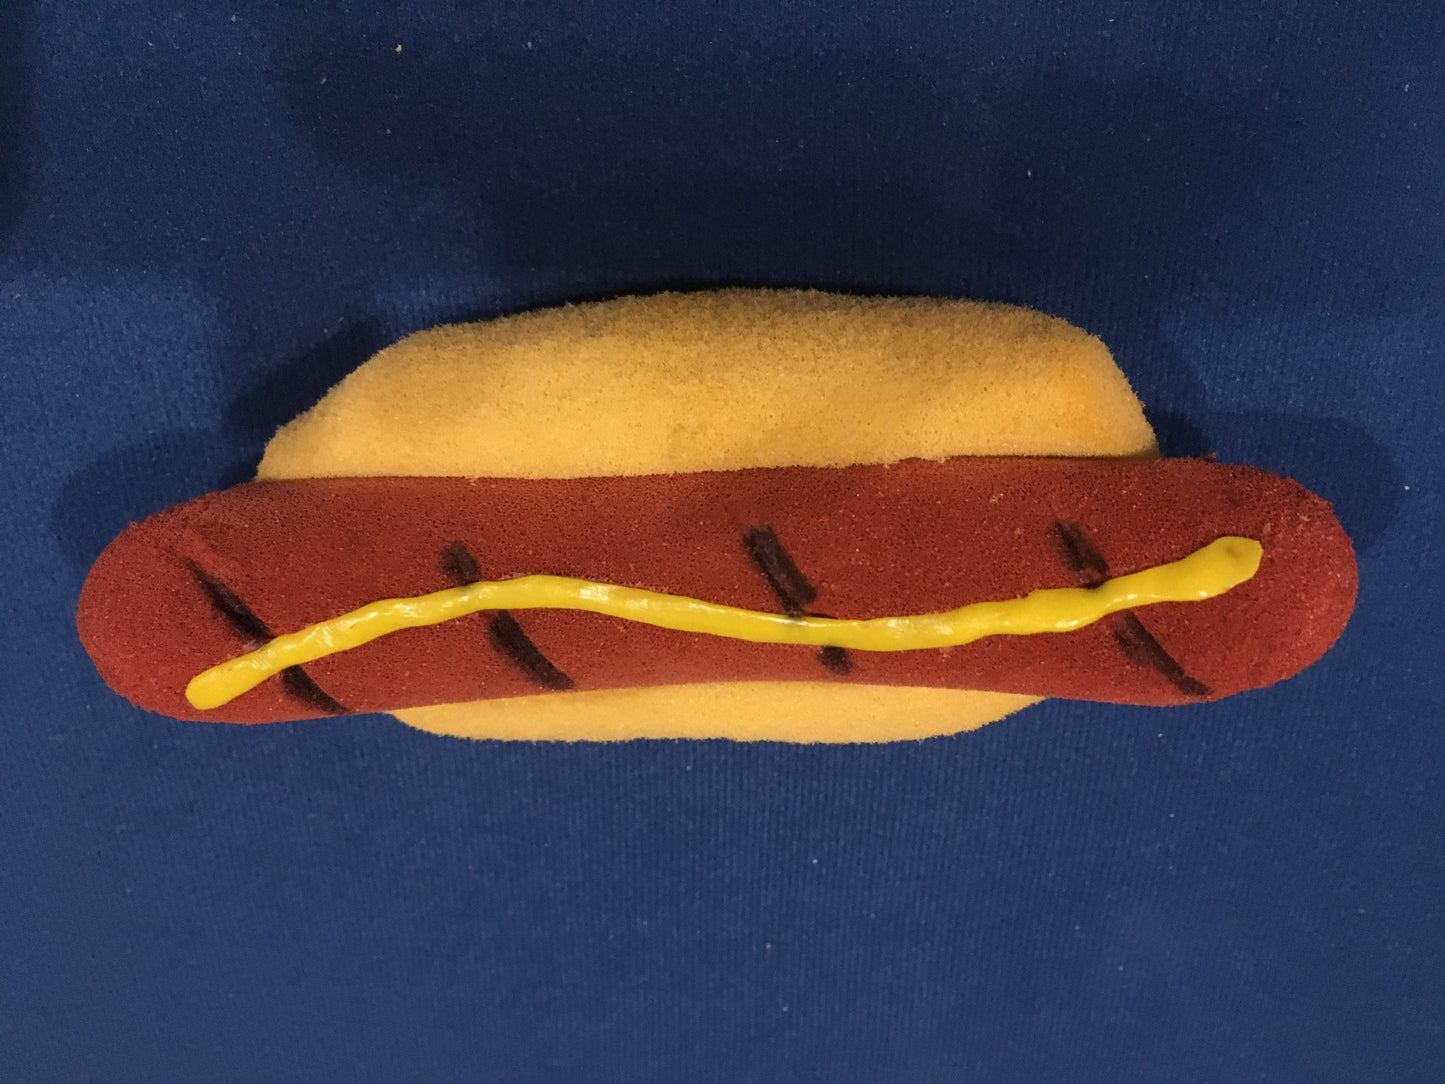 Hot Dog with Mustard by Alexander May, Used